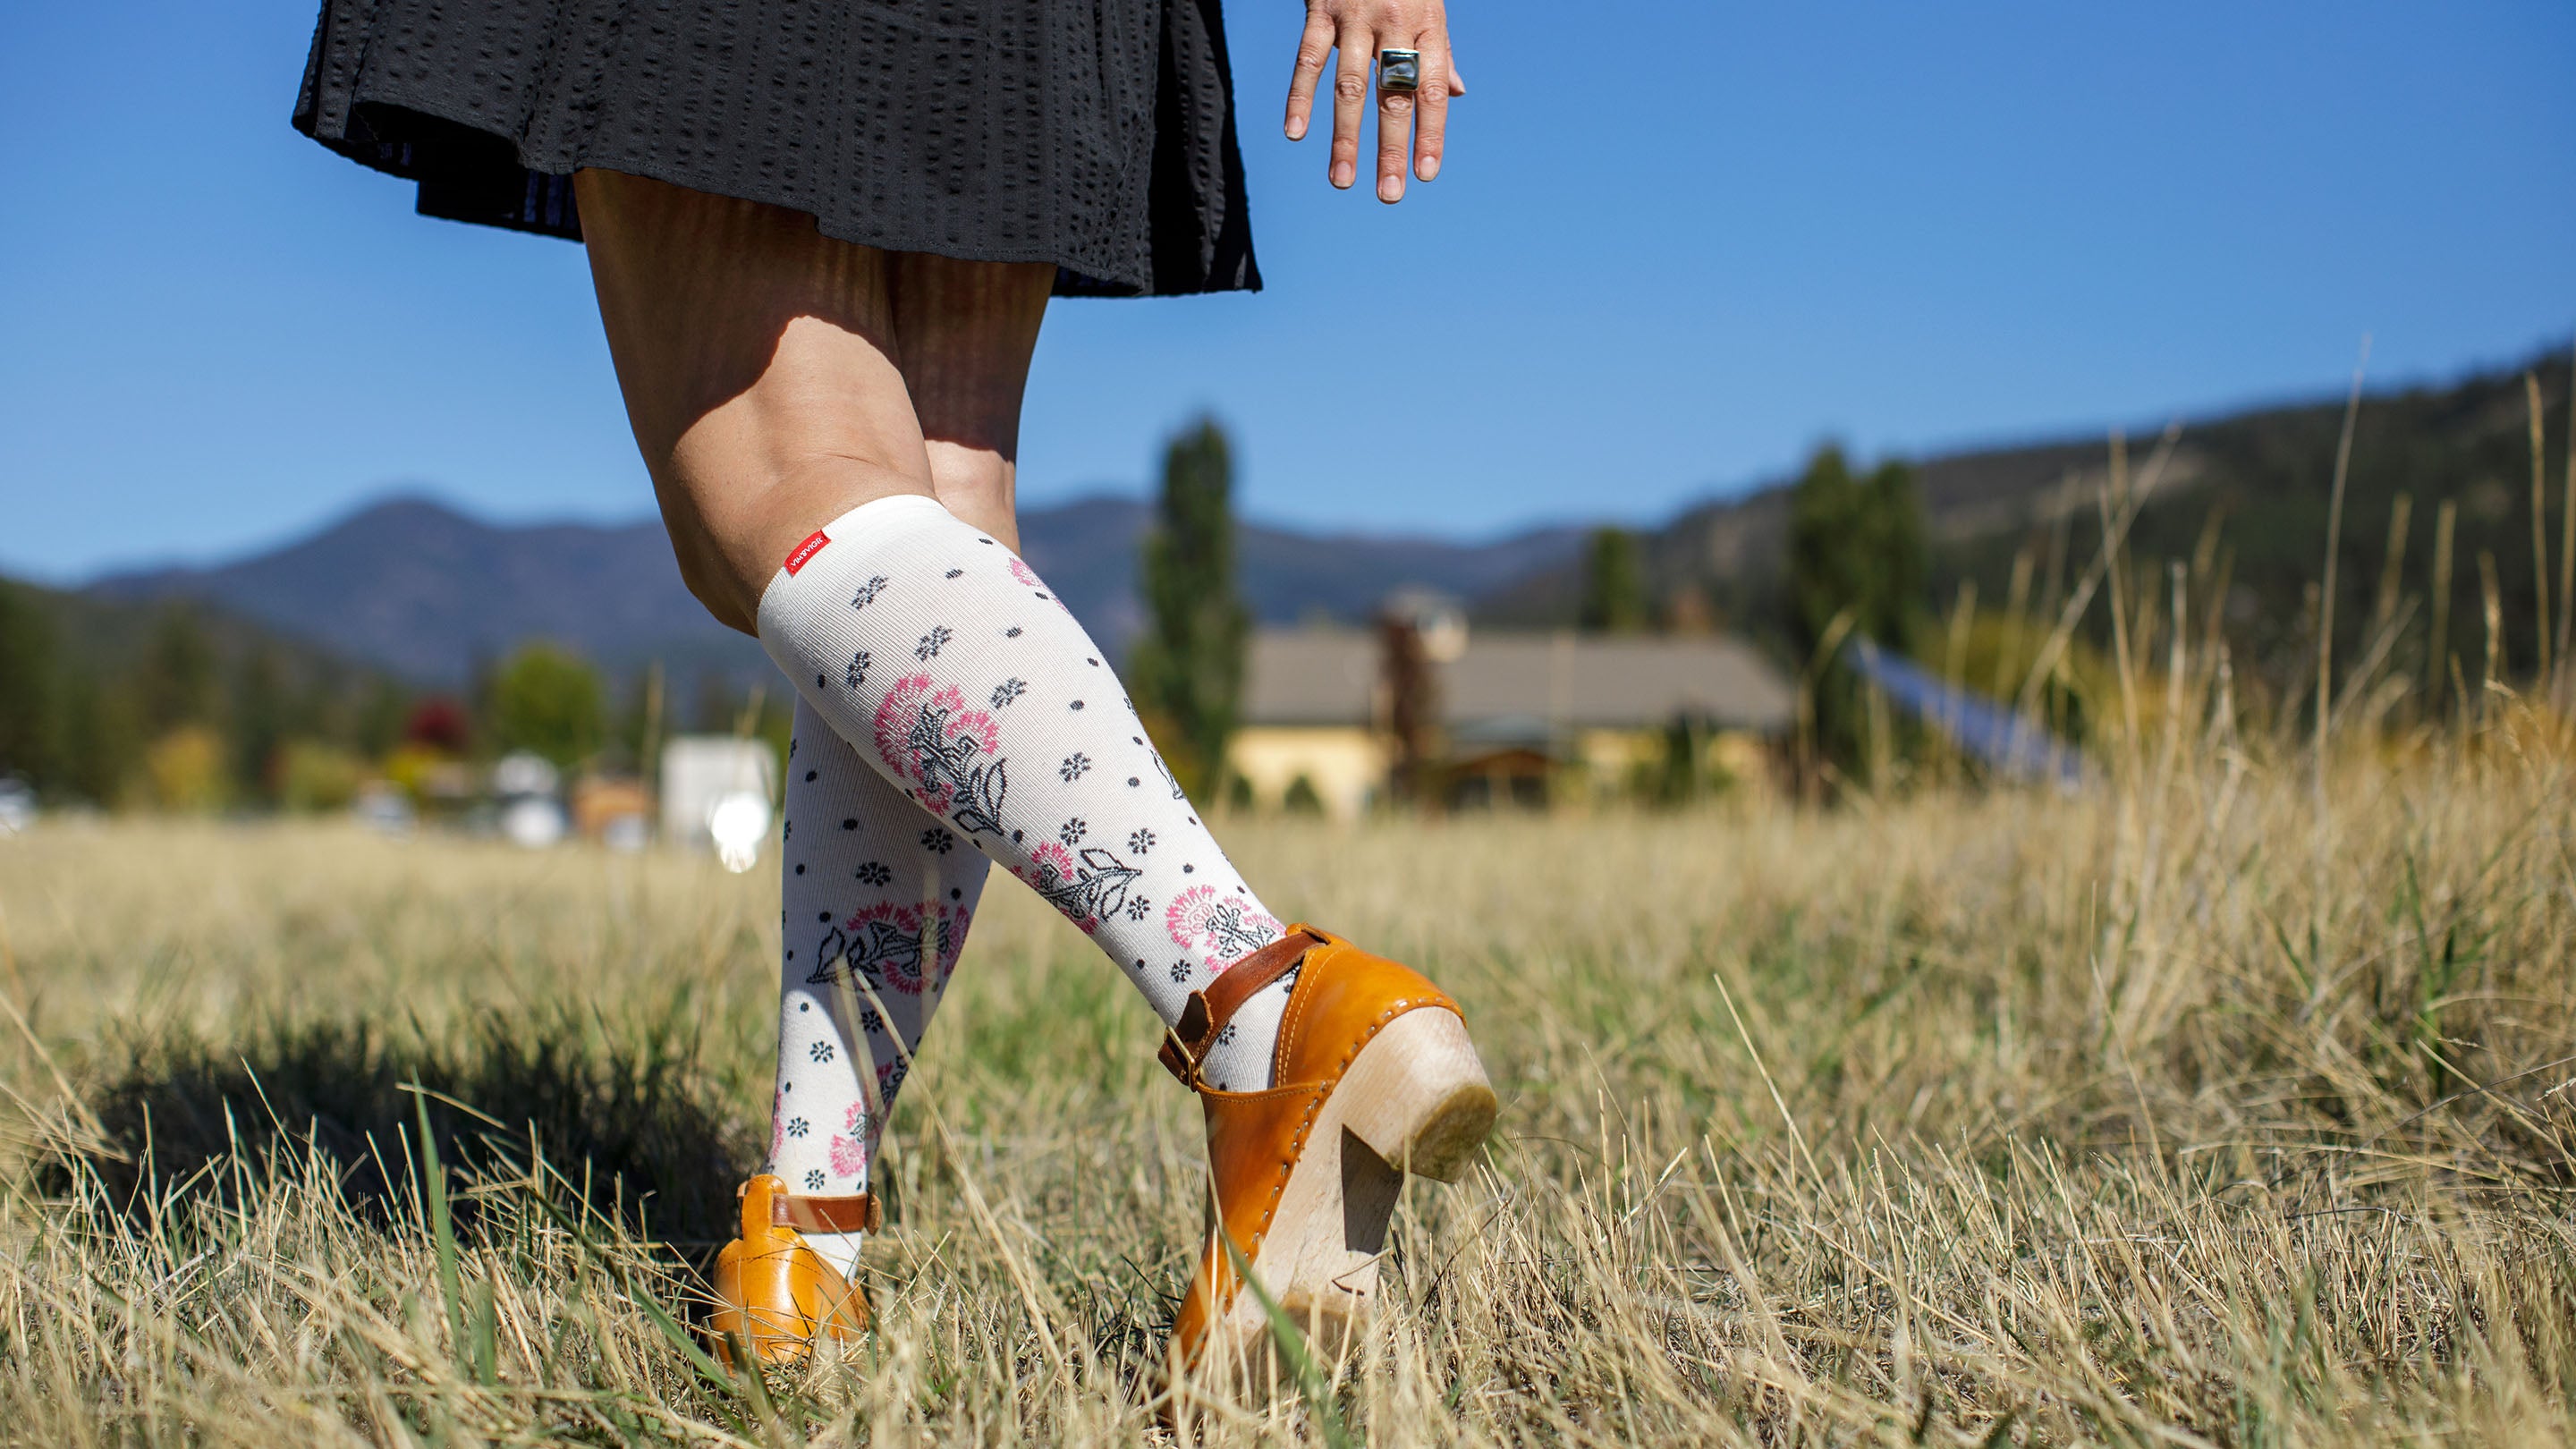 The Best Compression Stockings for Varicose Veins: How to Choose